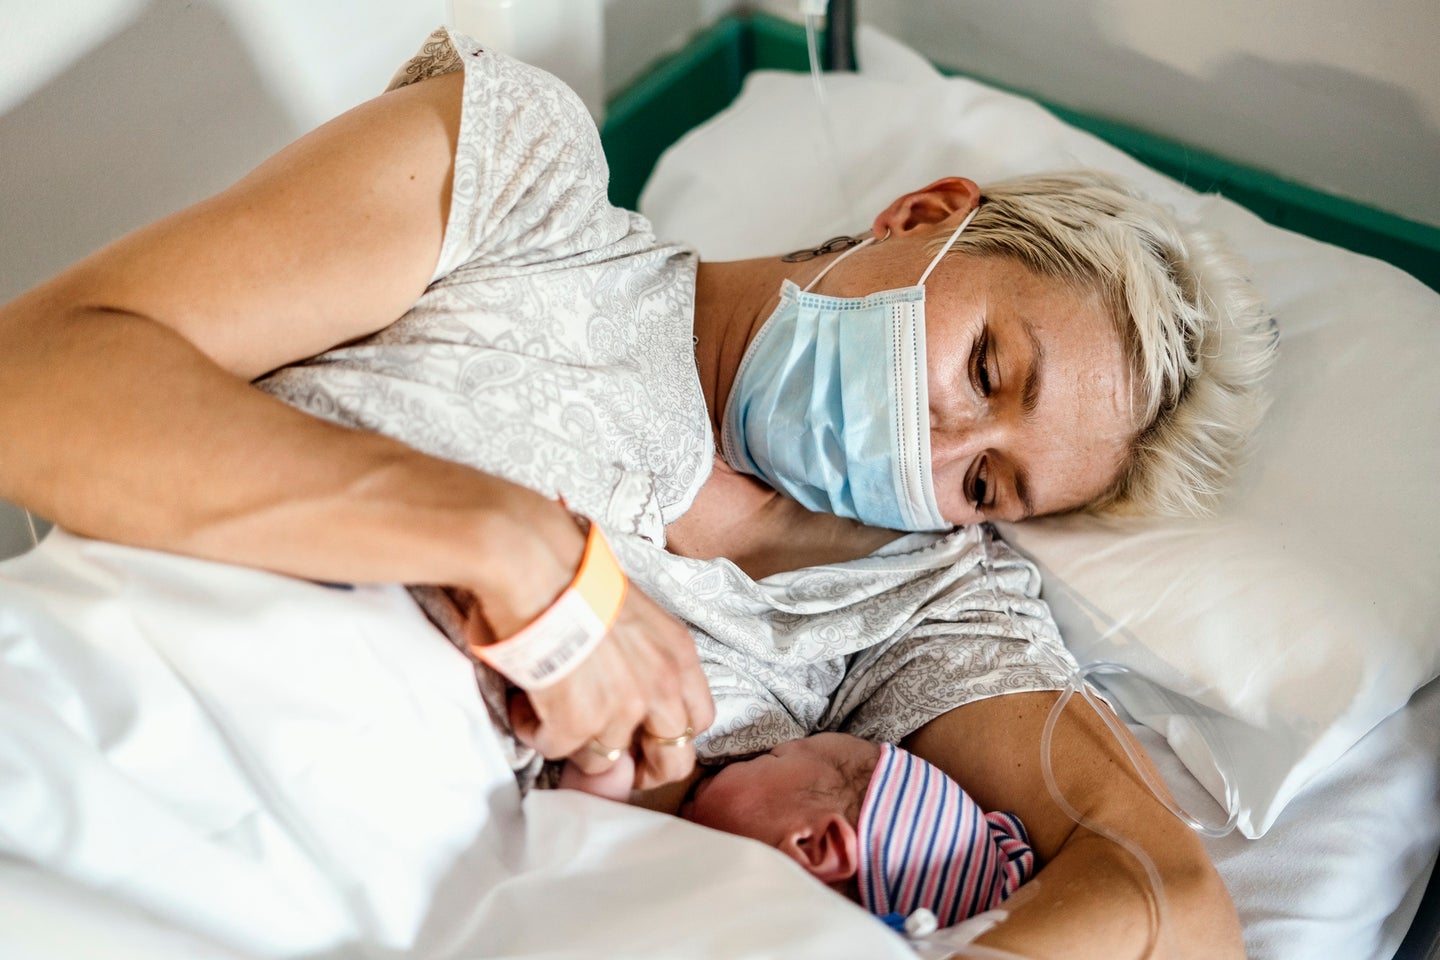 New mother nursing newborn baby while wearing a COVID mask